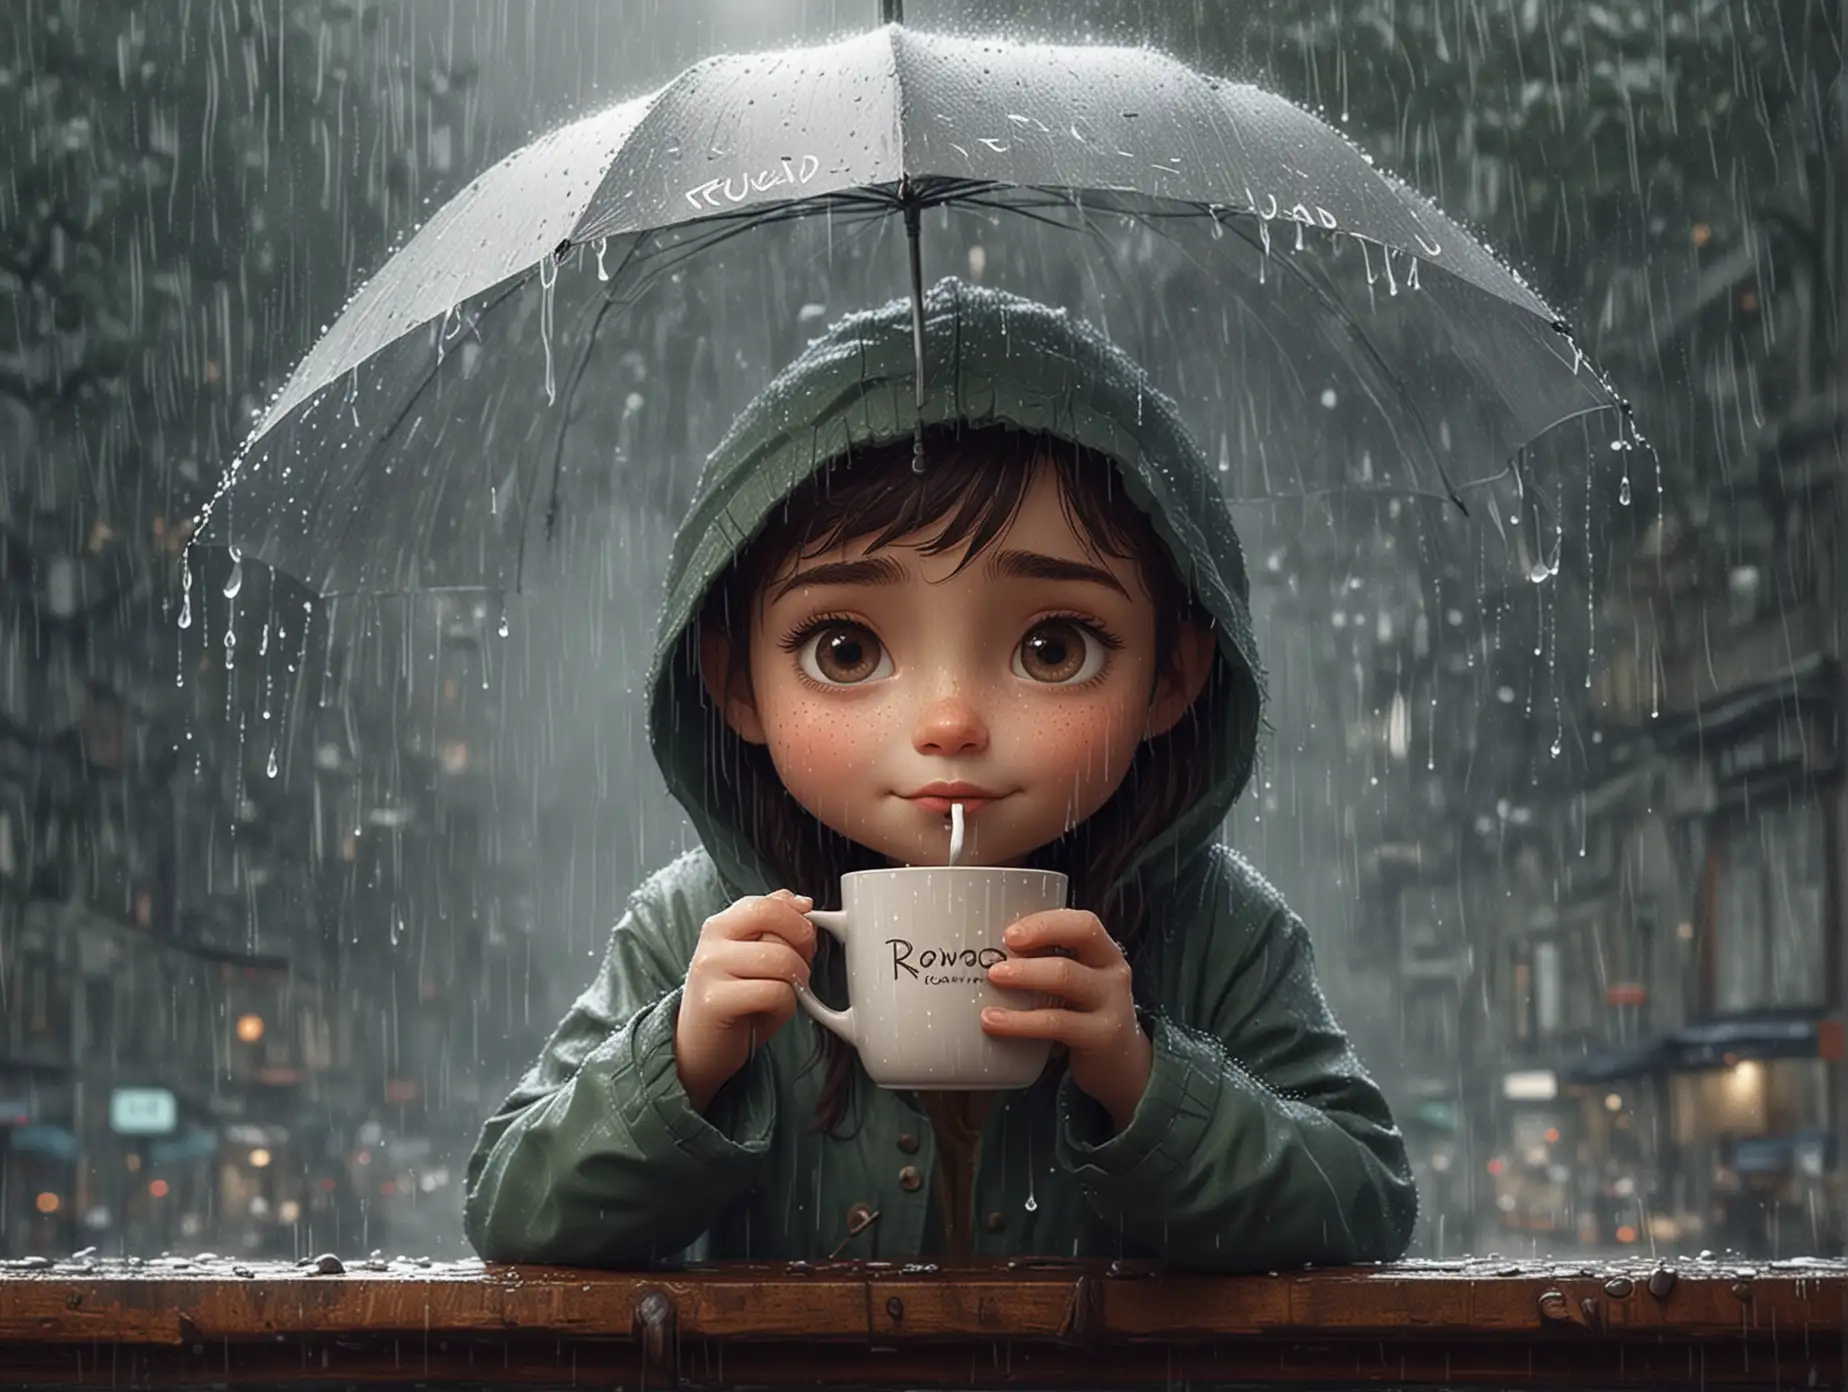 morning rain and a cute youth drinking coffee under the rain. The word "Rowad" is written on the coffee mug. Foggy weather. minimal illustration by Pixar